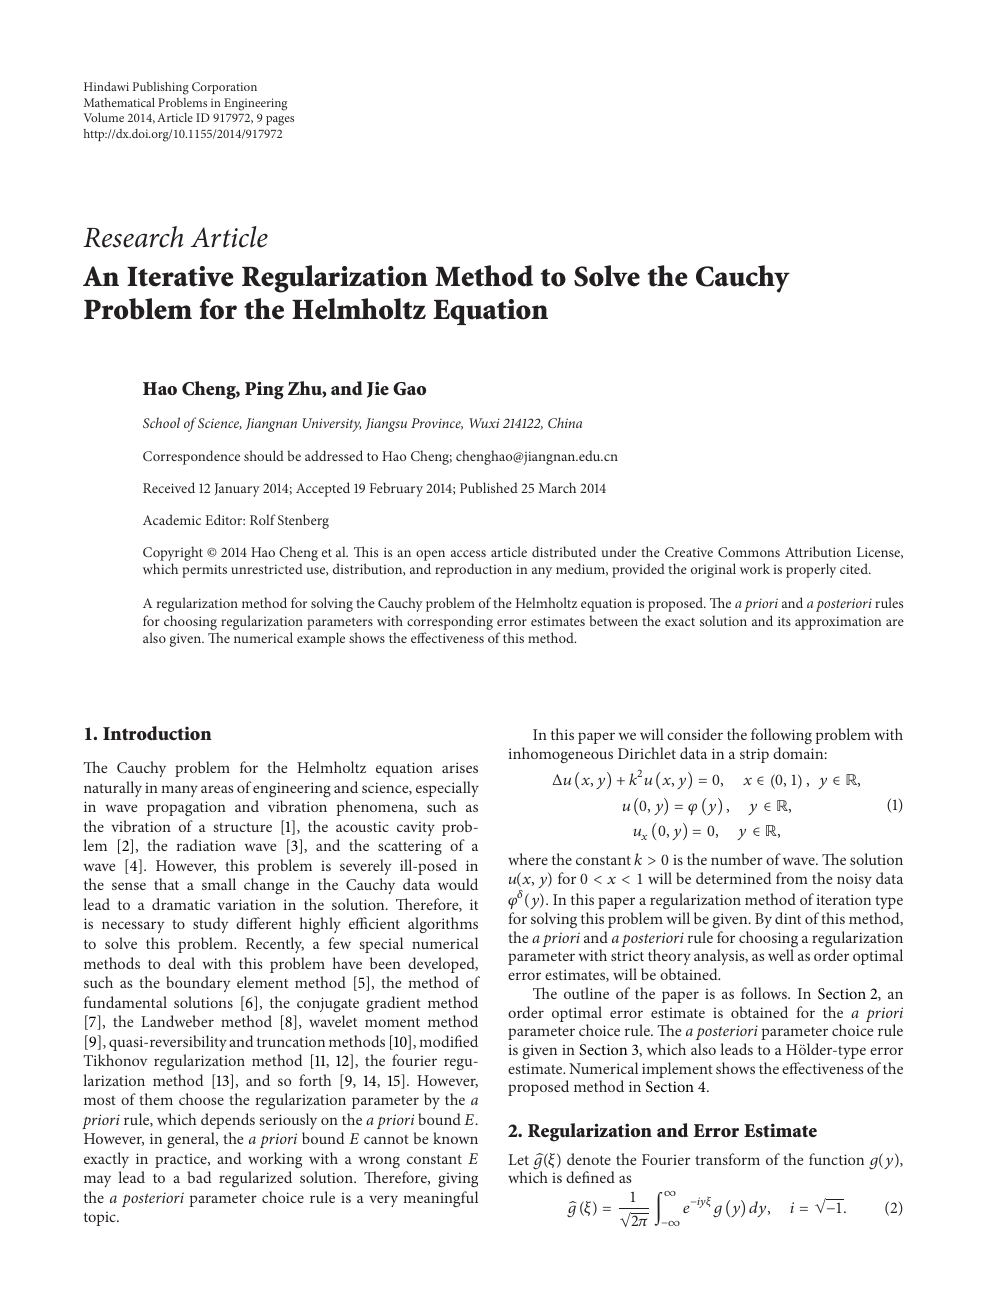 An Iterative Regularization Method To Solve The Cauchy Problem For The Helmholtz Equation Topic Of Research Paper In Mathematics Download Scholarly Article Pdf And Read For Free On Cyberleninka Open Science